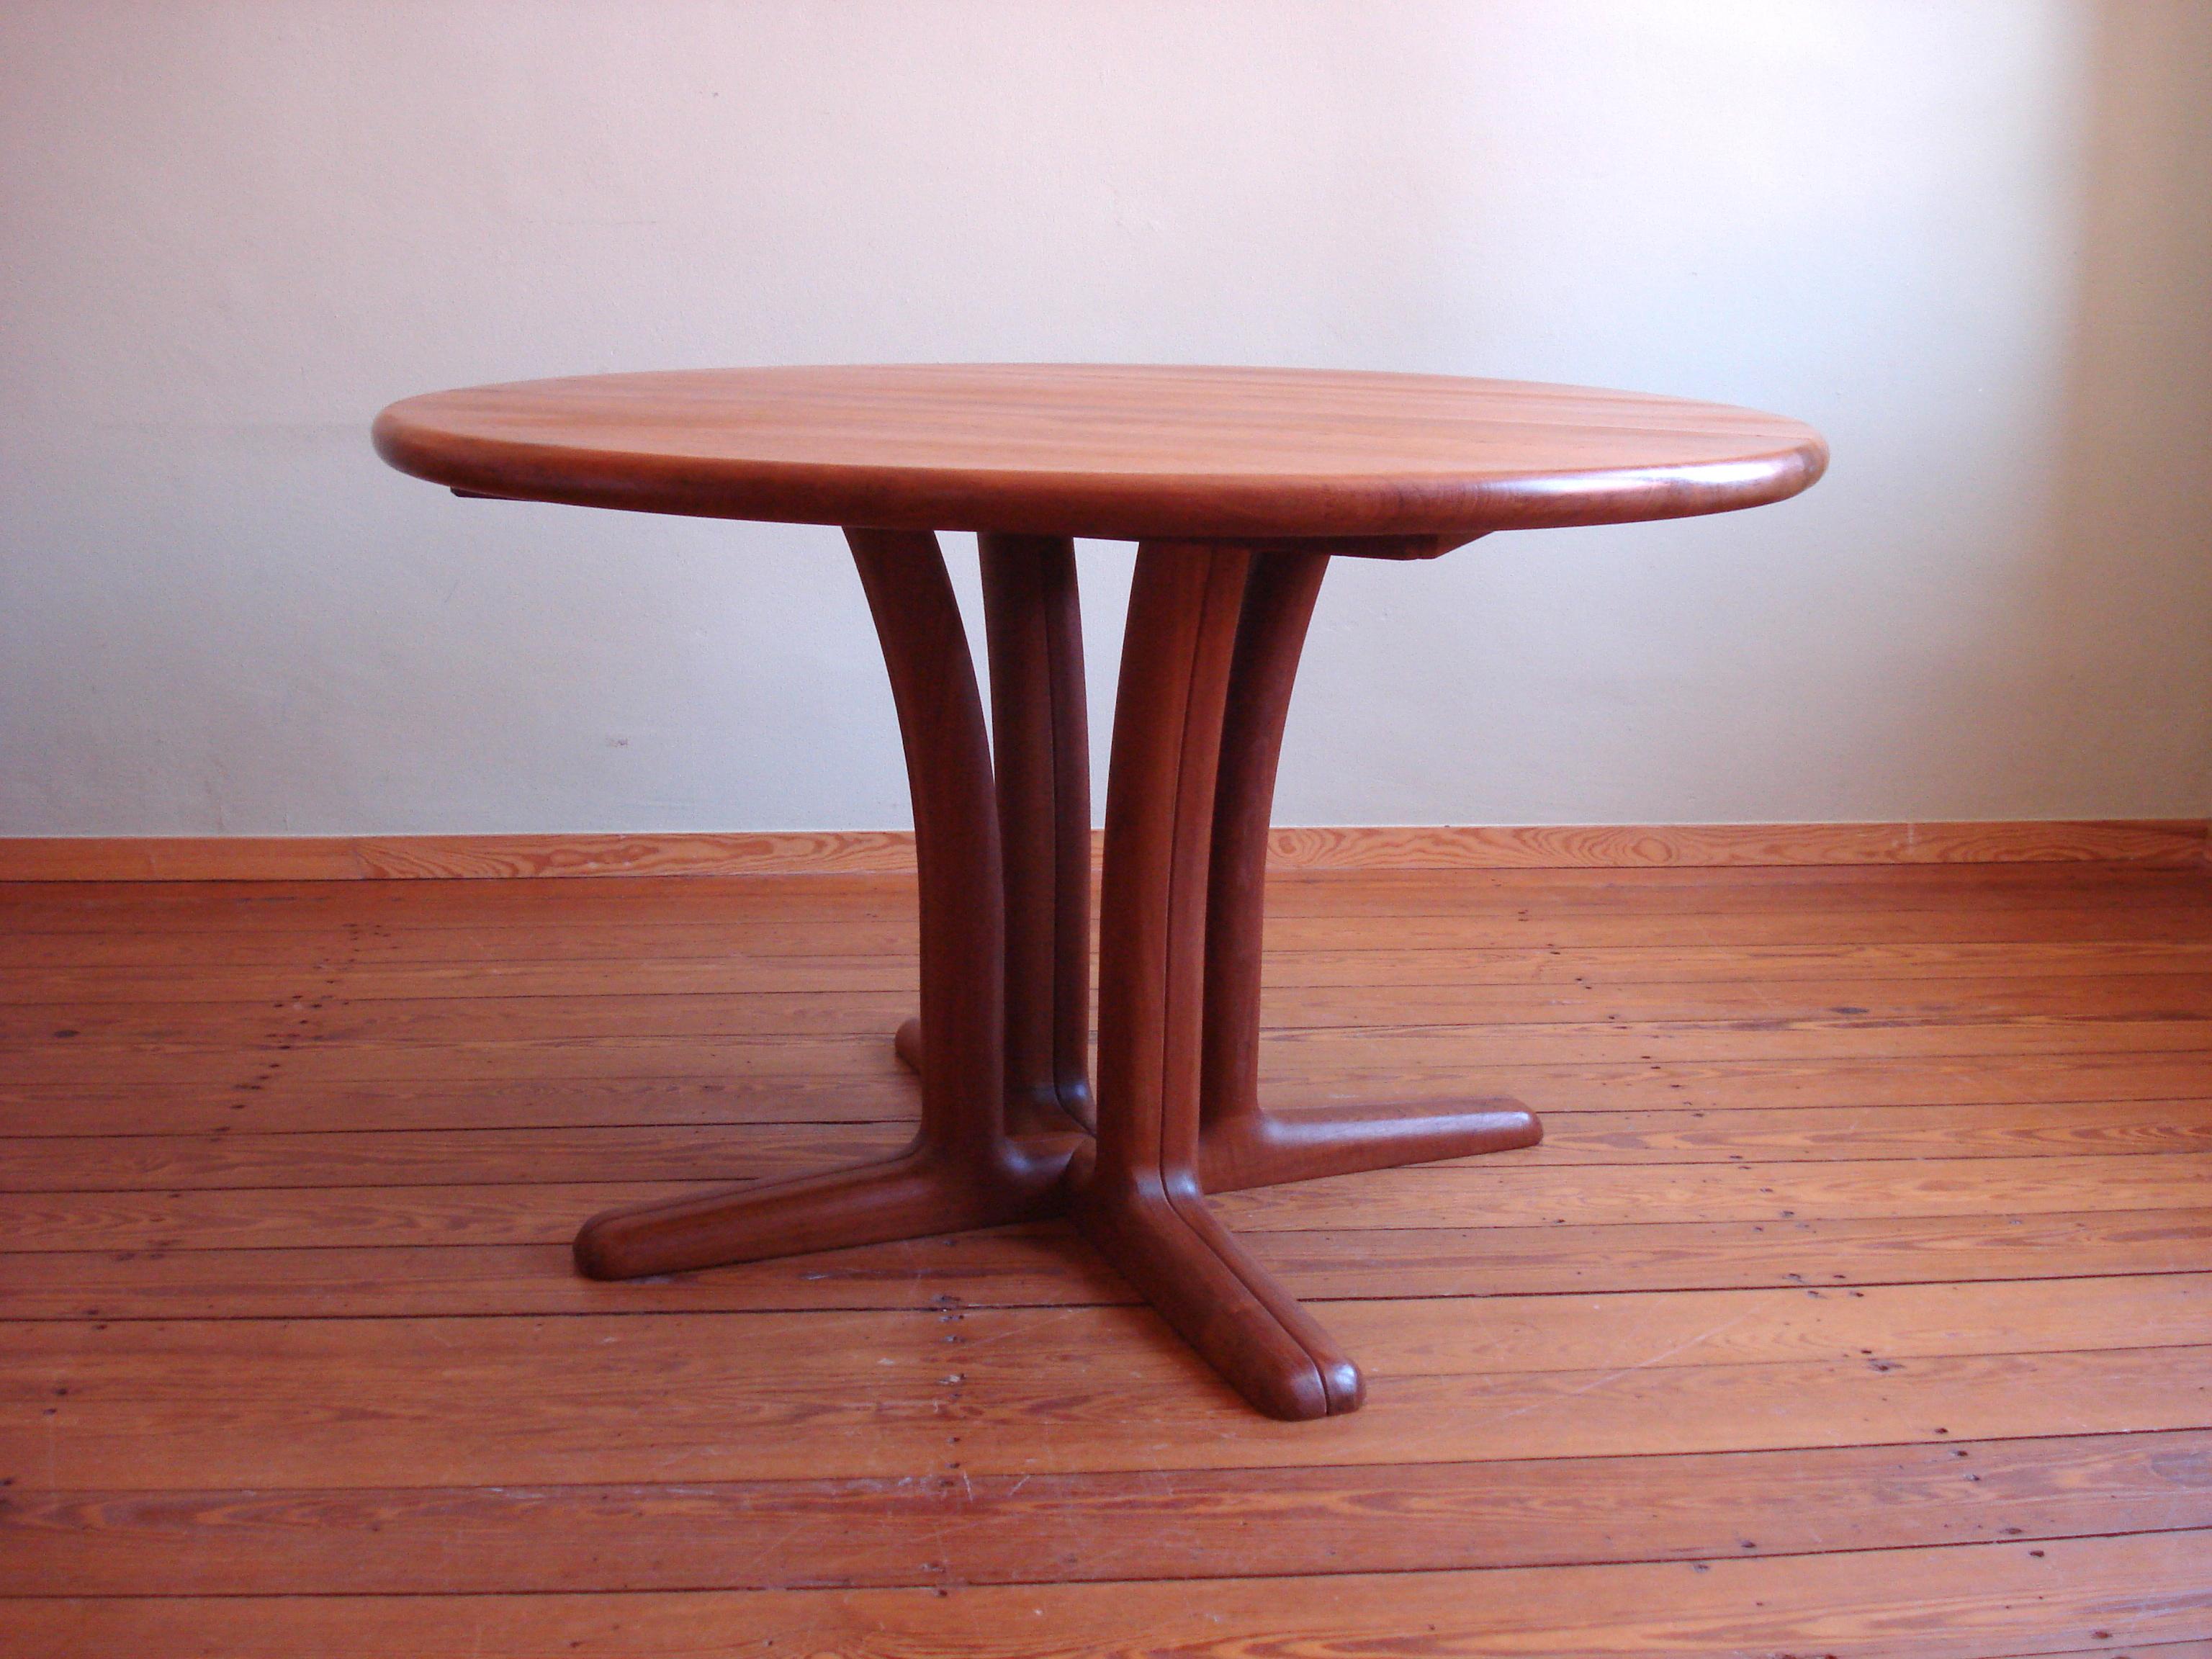 Stunning mid century oval danish extension dining table with two leaves, made out of solid teak wood.
The table comes with two separate elements / leaves, each 50 cm, so the table can be adjusted to a length of 170 and (maximum) 220 cm as well.